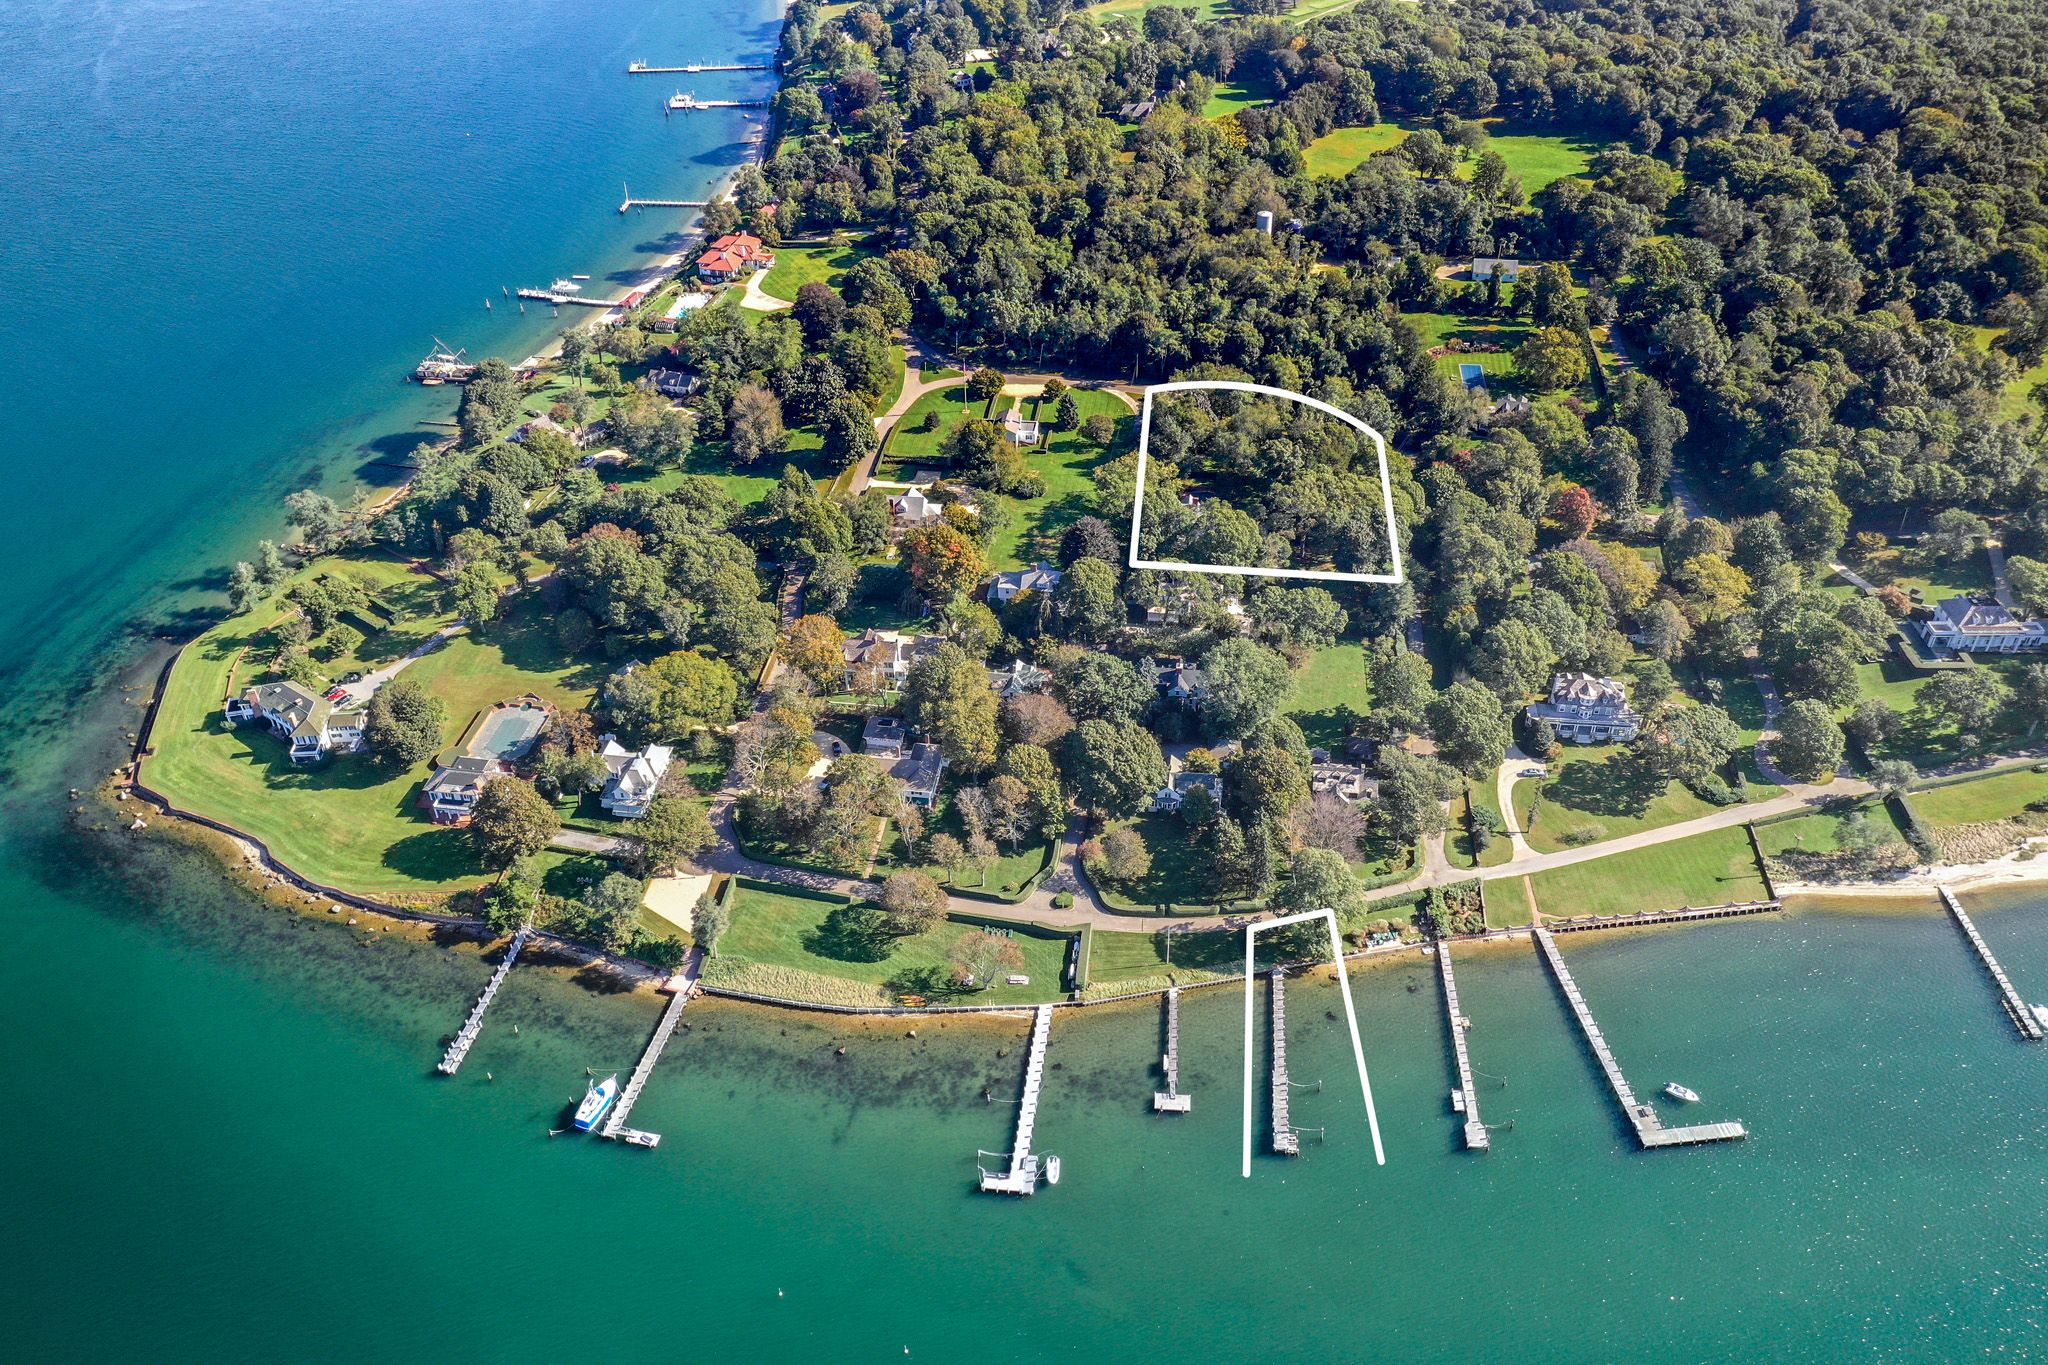 Property in Shelter Island Out East